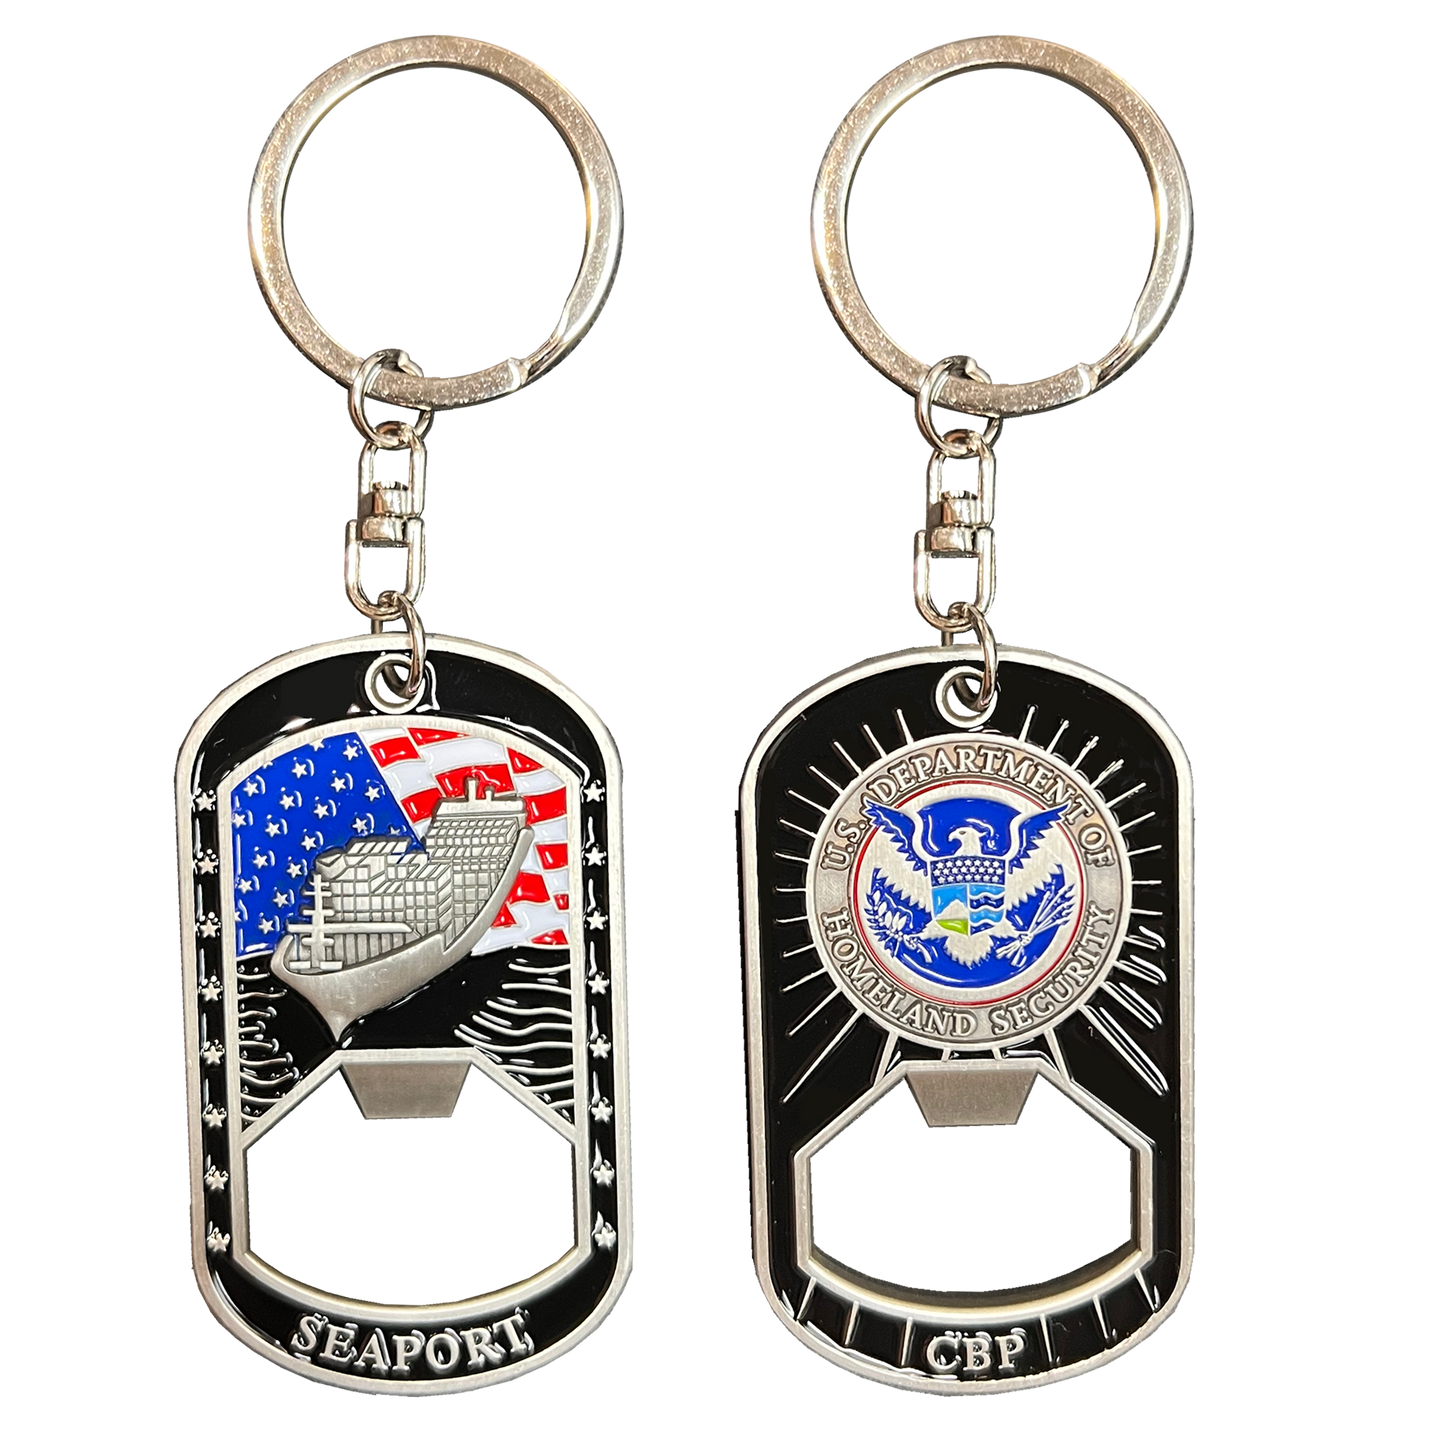 GL9-008 CBP Officer OFO Seaport A-TCET Trade Cruise Ship Passenger Challenge Coin Keychain Bottle Opener